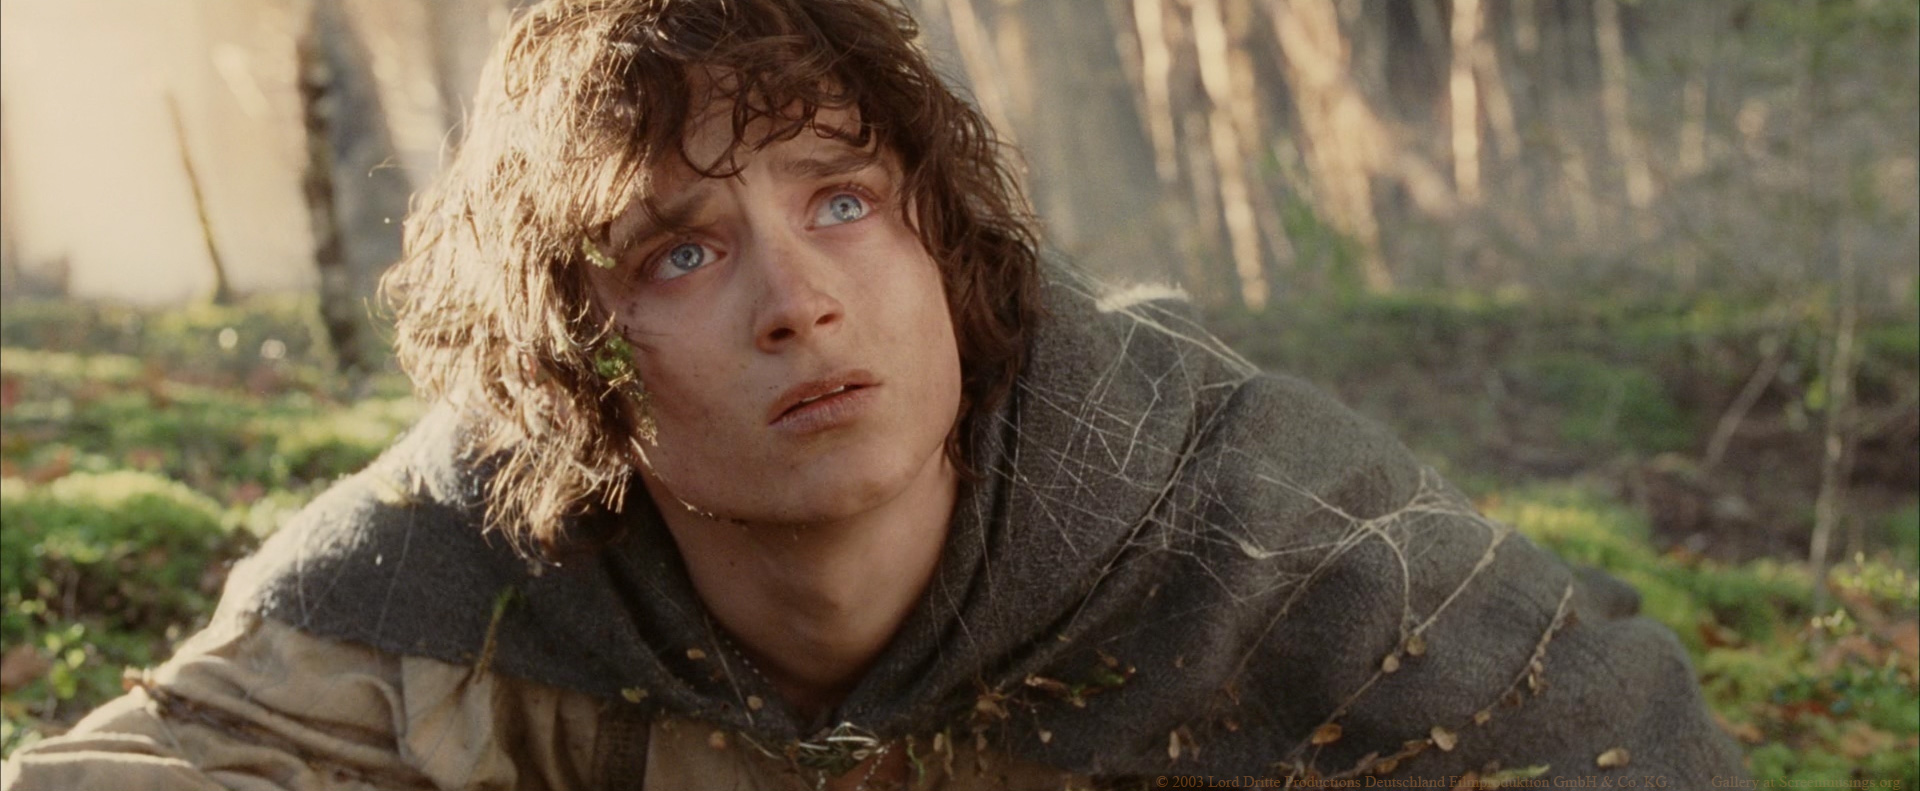 Elijah Wood, Frodo in The Lord of the Rings: The Return of the King